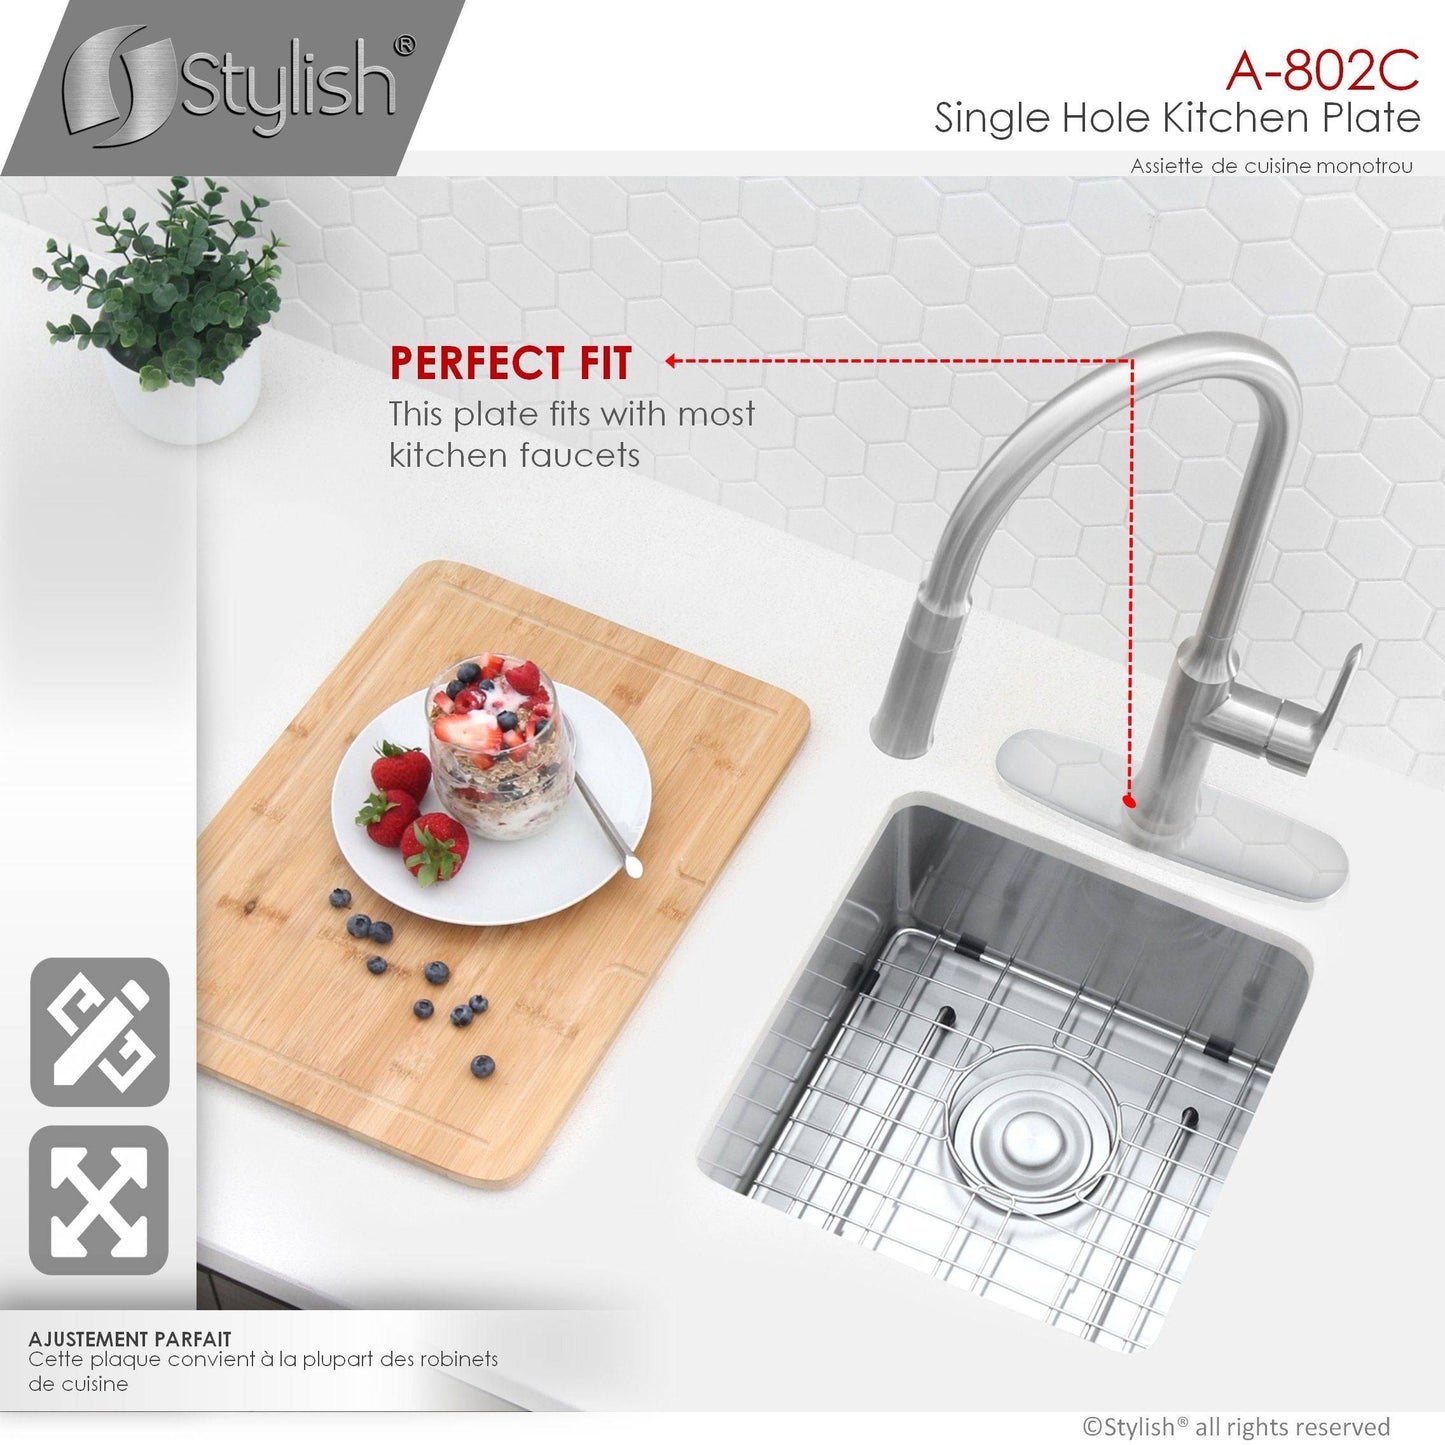 Stylish Kitchen Faucet Plate in Stainless Steel in Polished Chrome Finish A-802C - Renoz